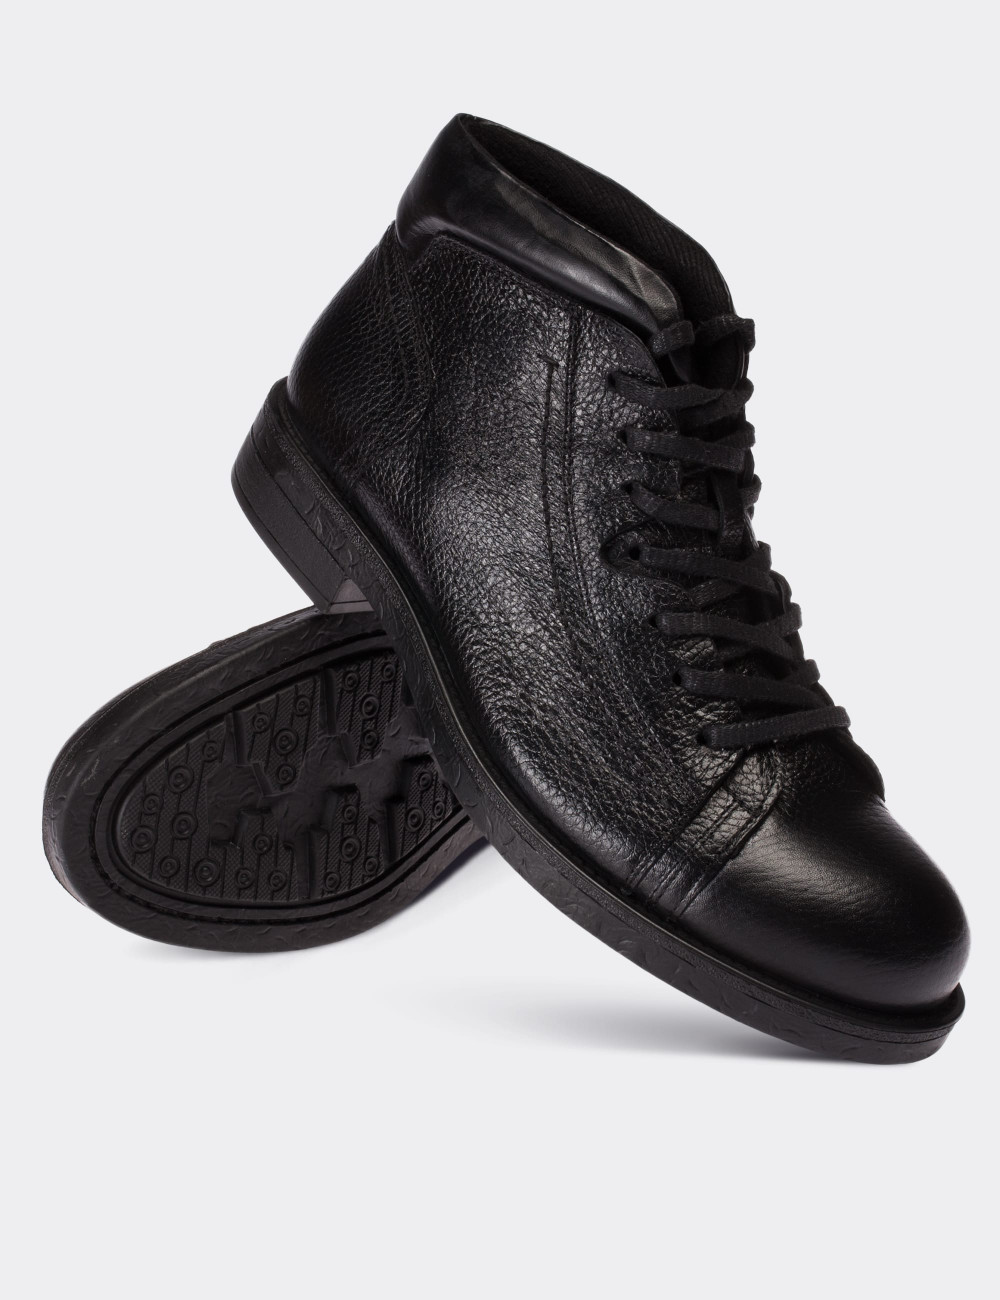 Black  Leather Boots - 01630MSYHC01